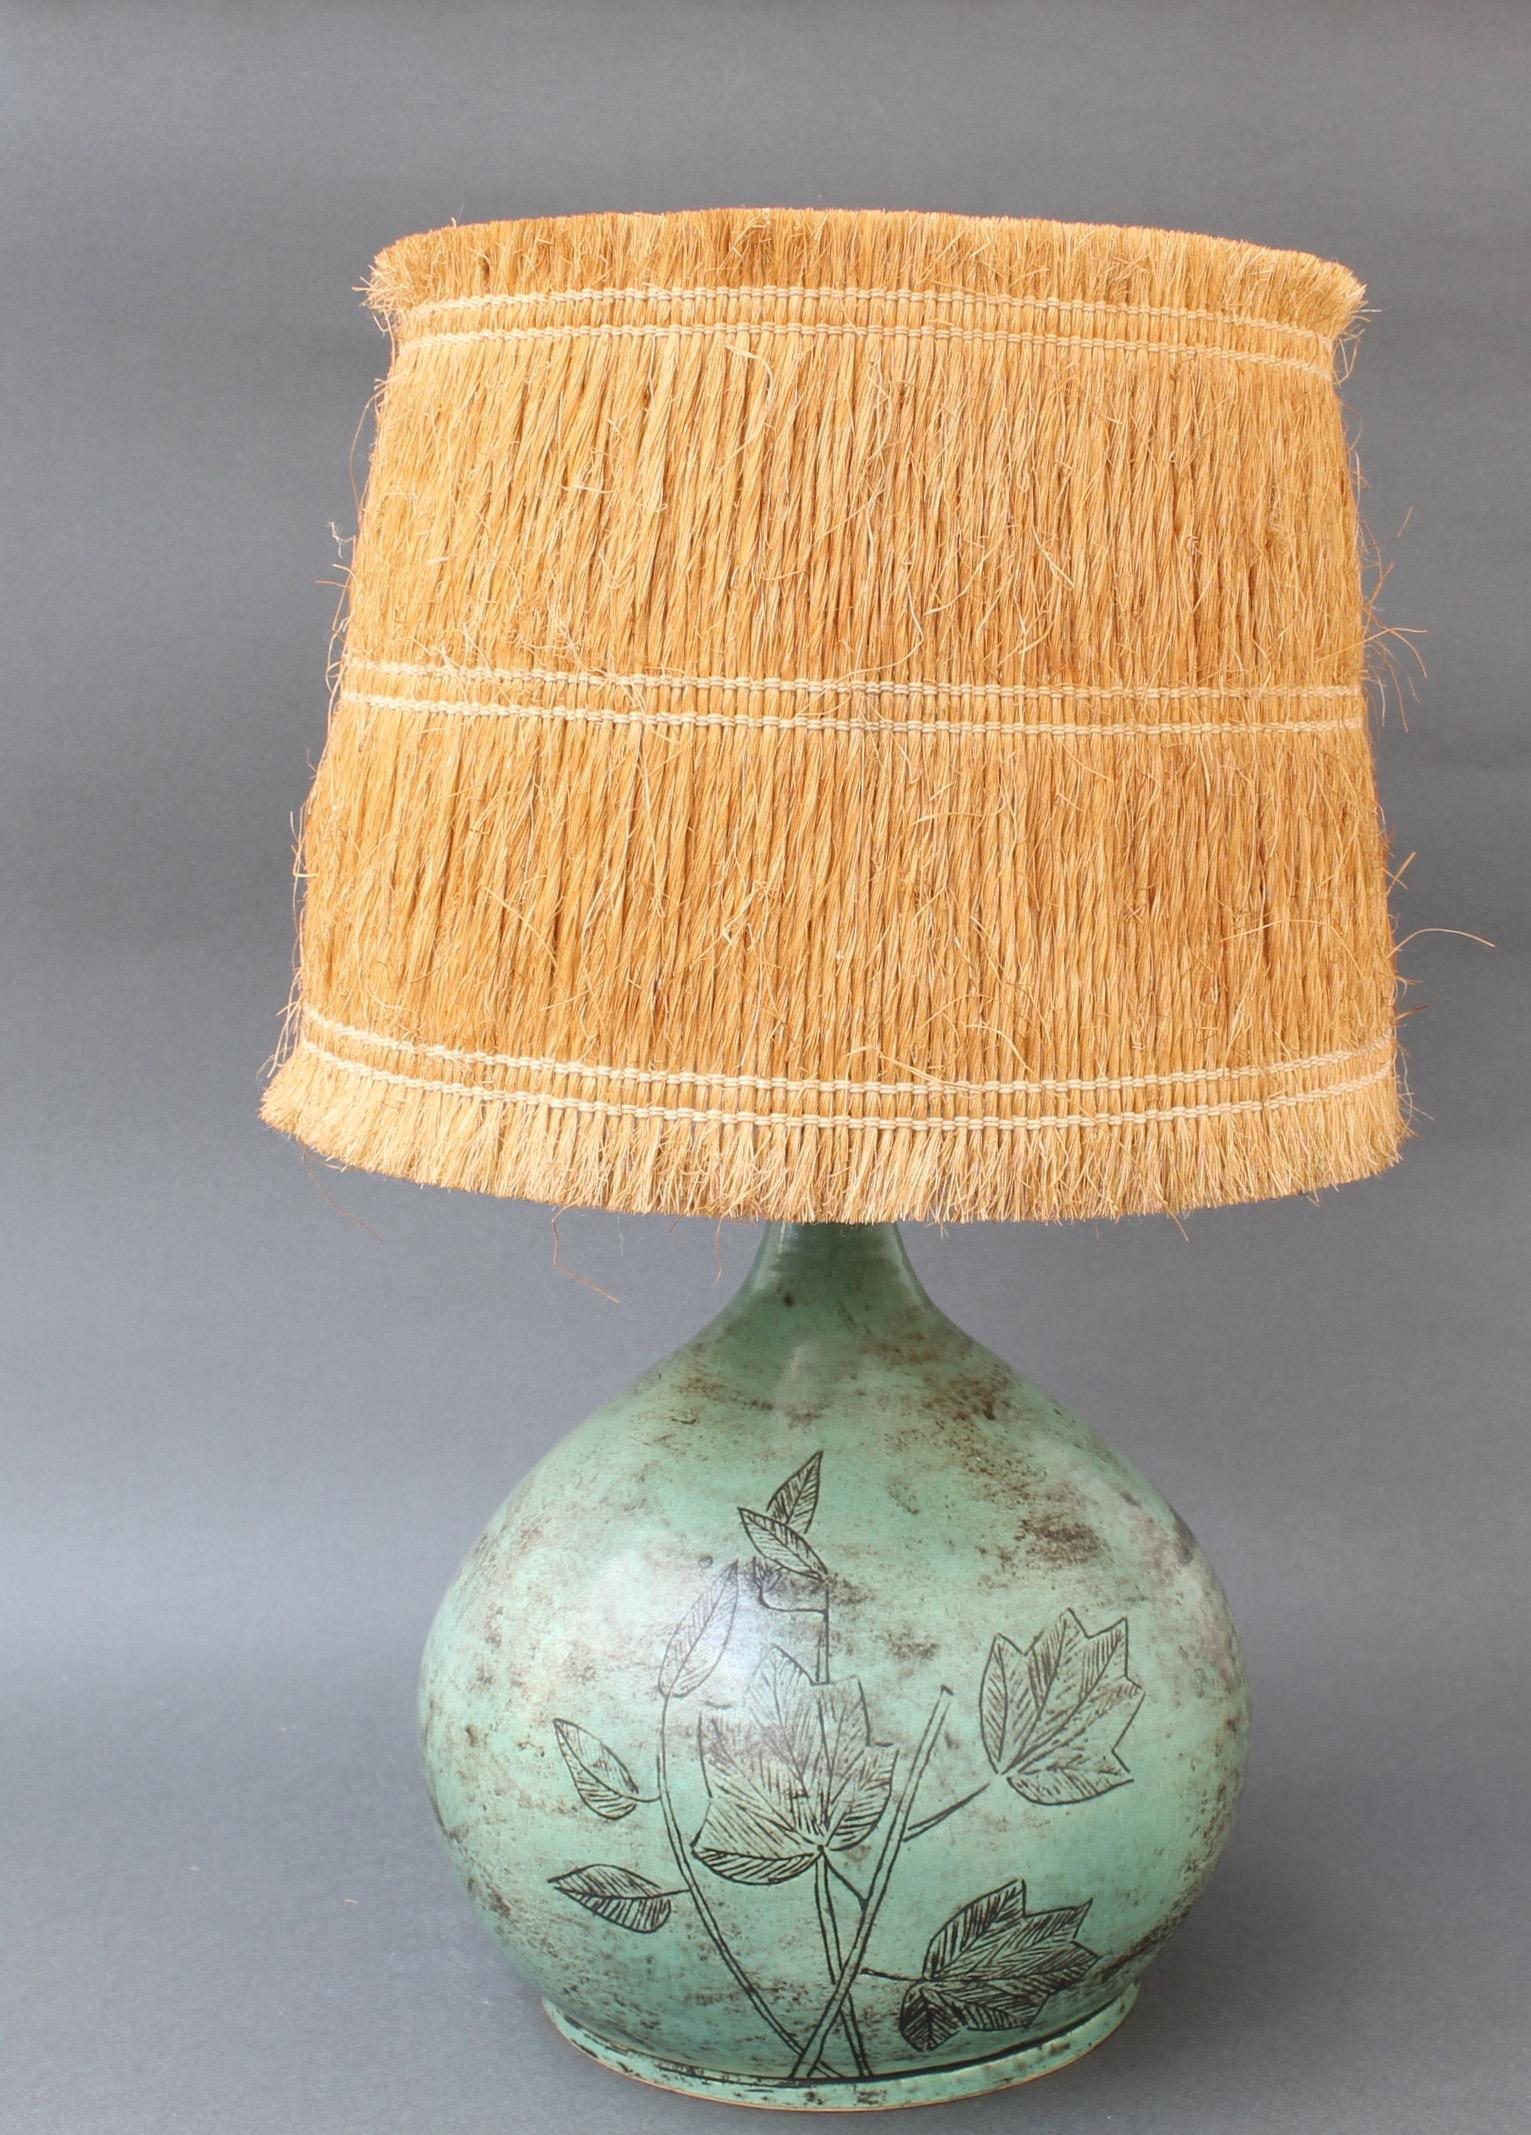 French Ceramic Table Lamp by Jacques Blin with Raffia Lampshade, circa 1950s Green